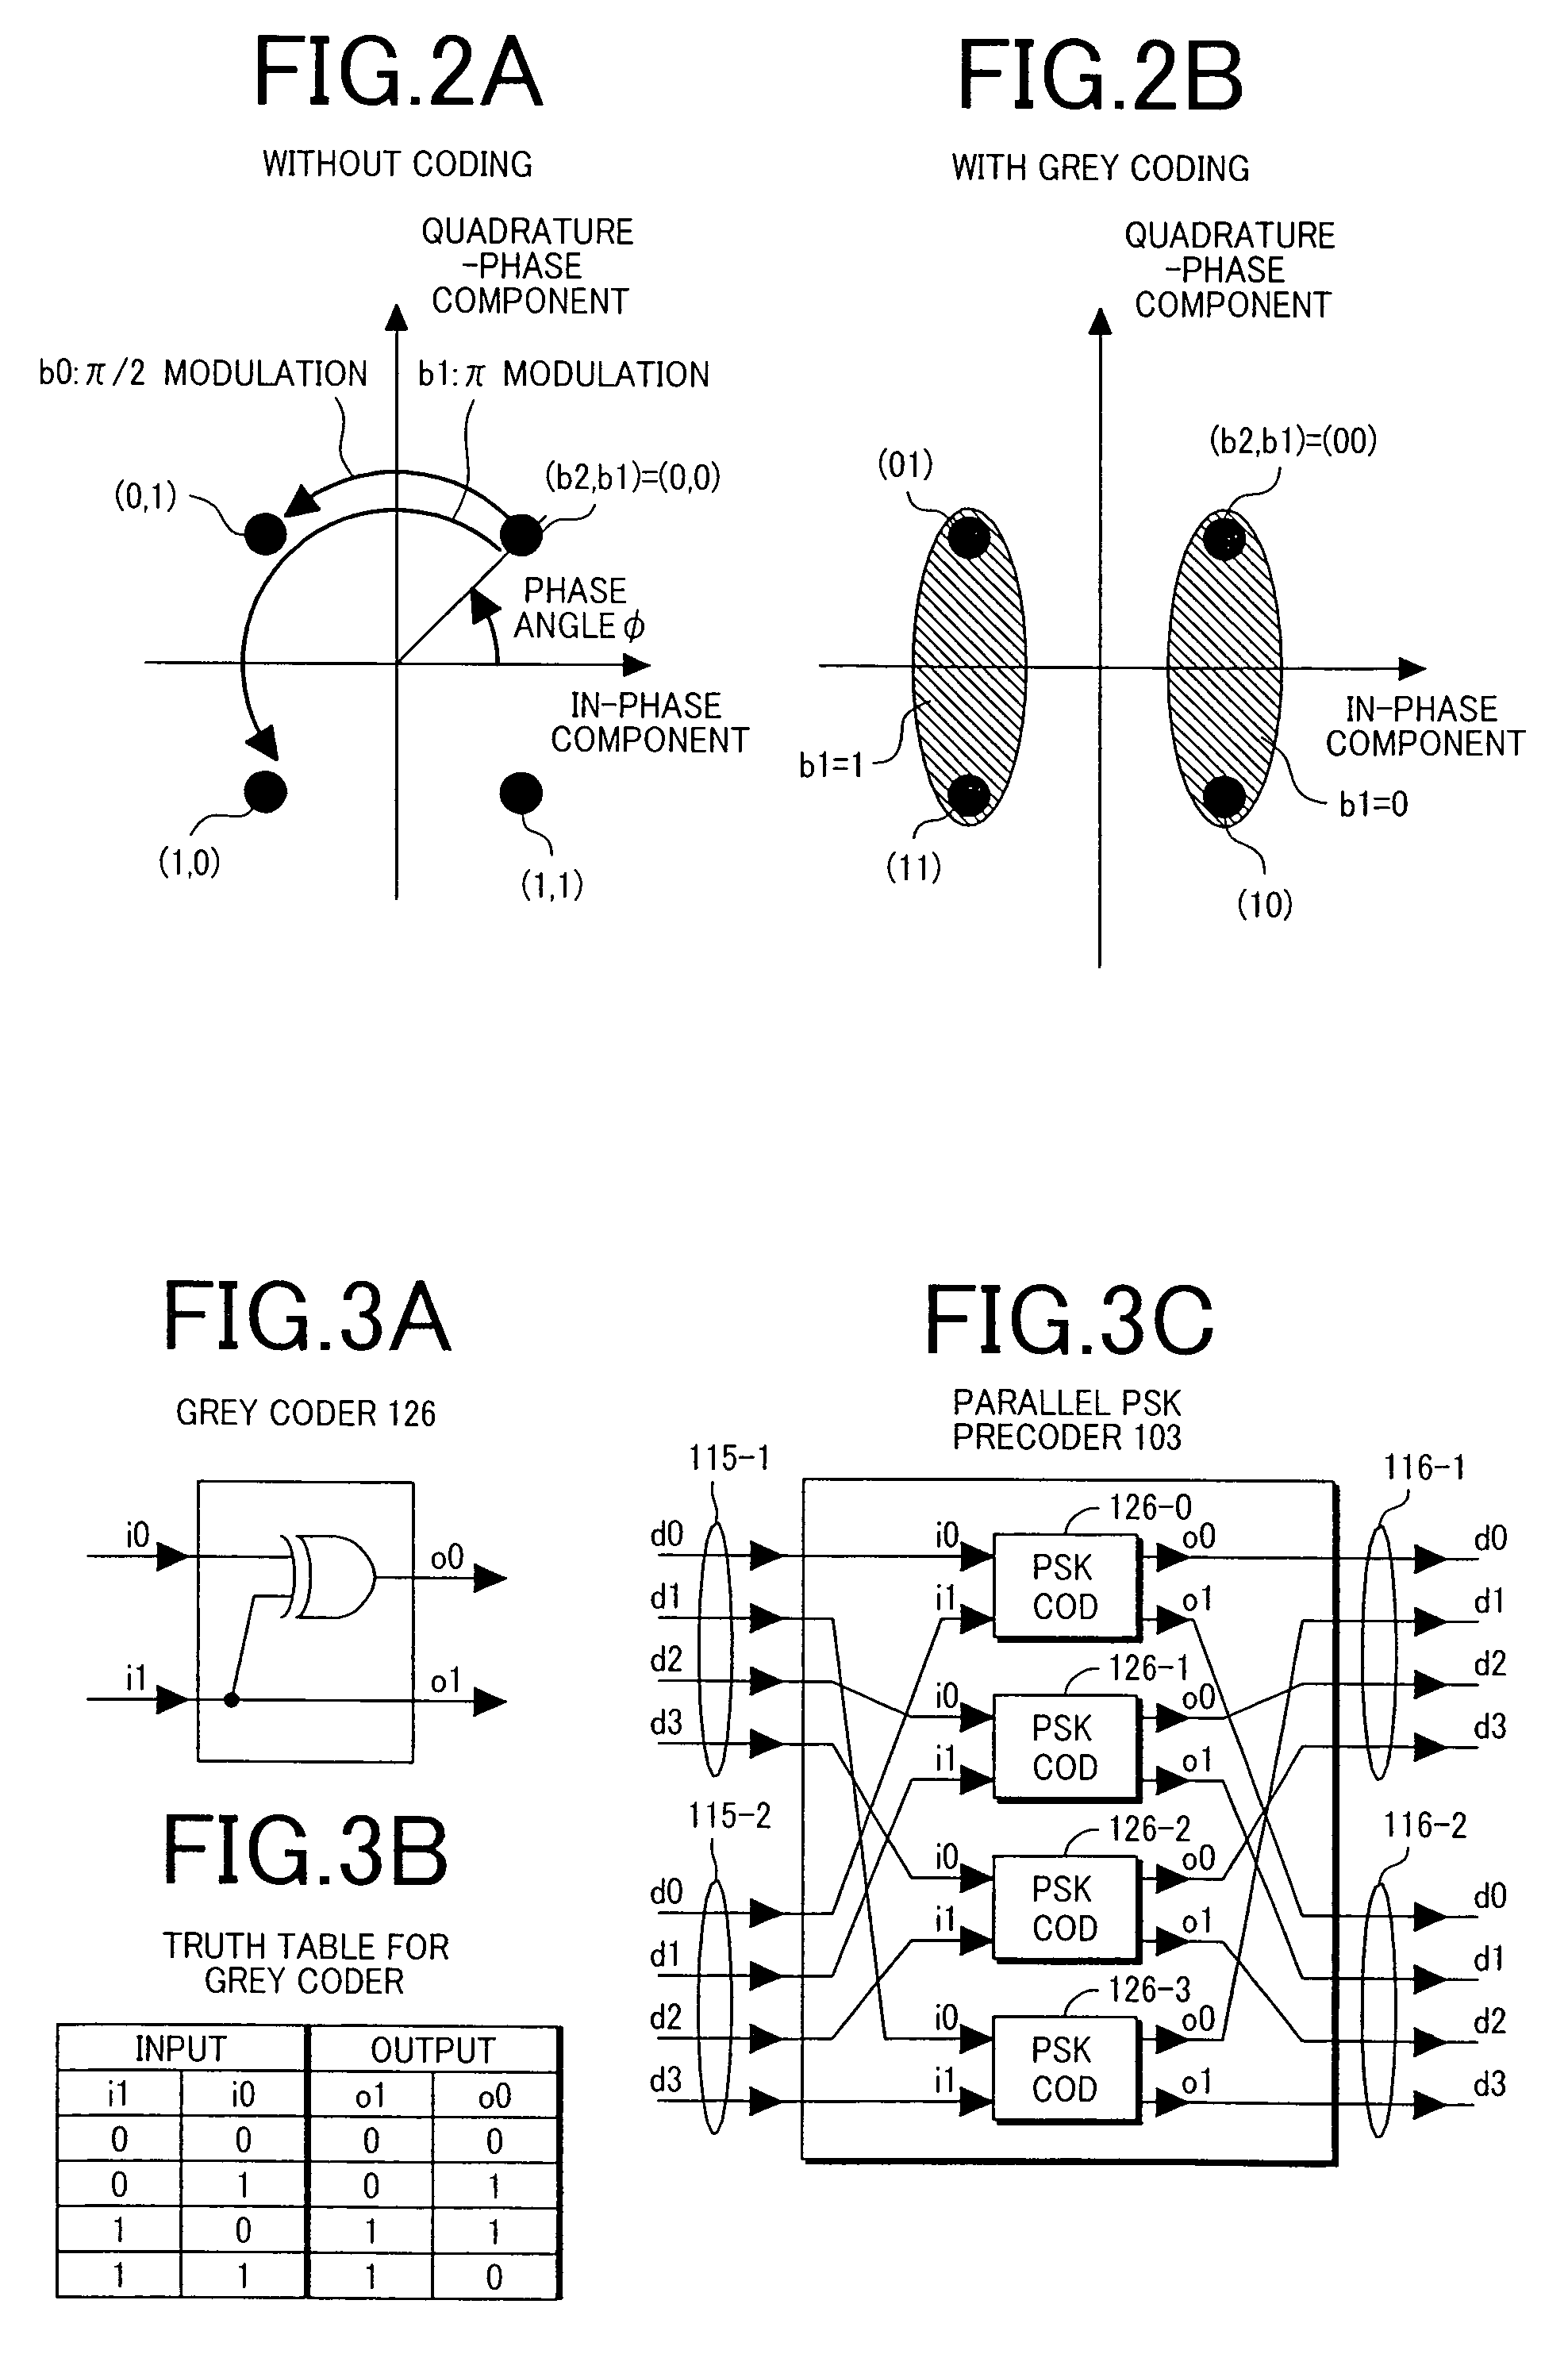 Optical transmission equipment and integrated circuit